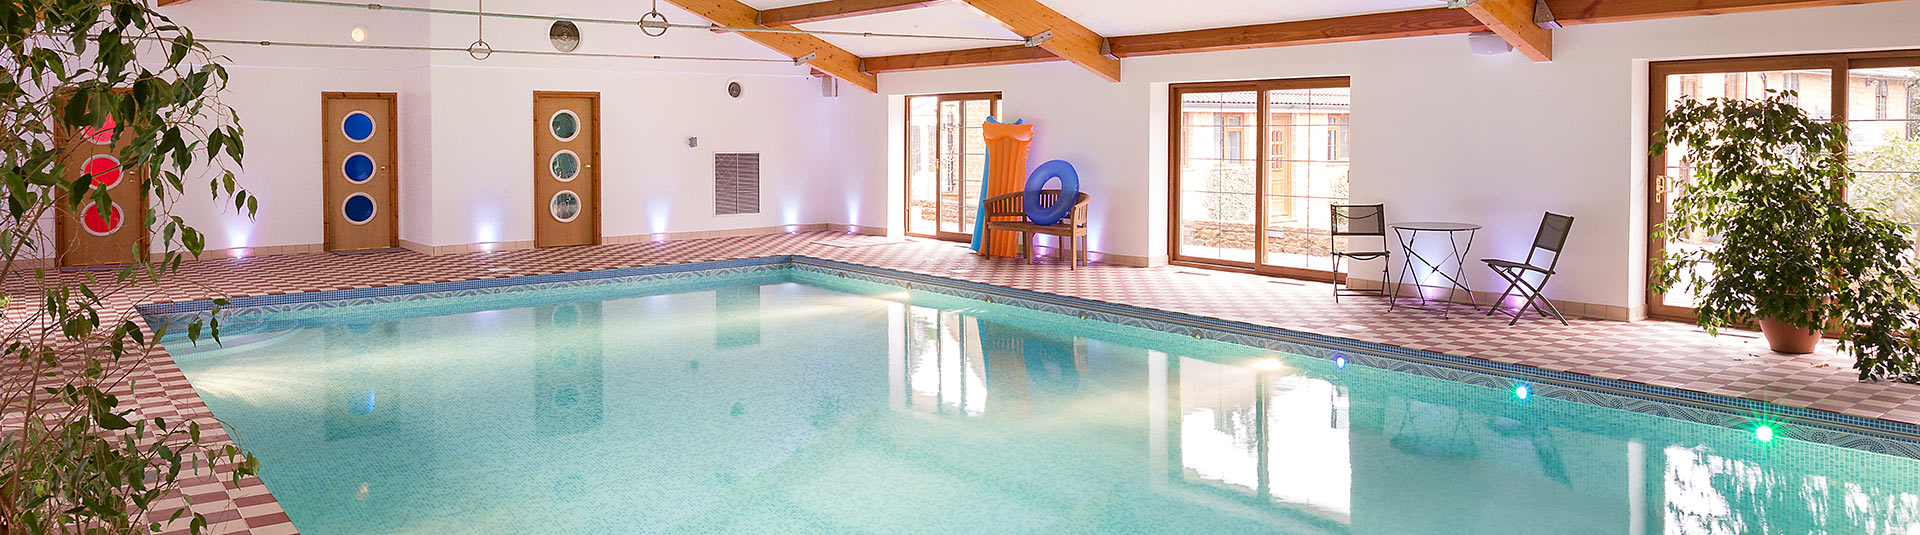 Holiday Cottages With Indoor Pools In Cornwall